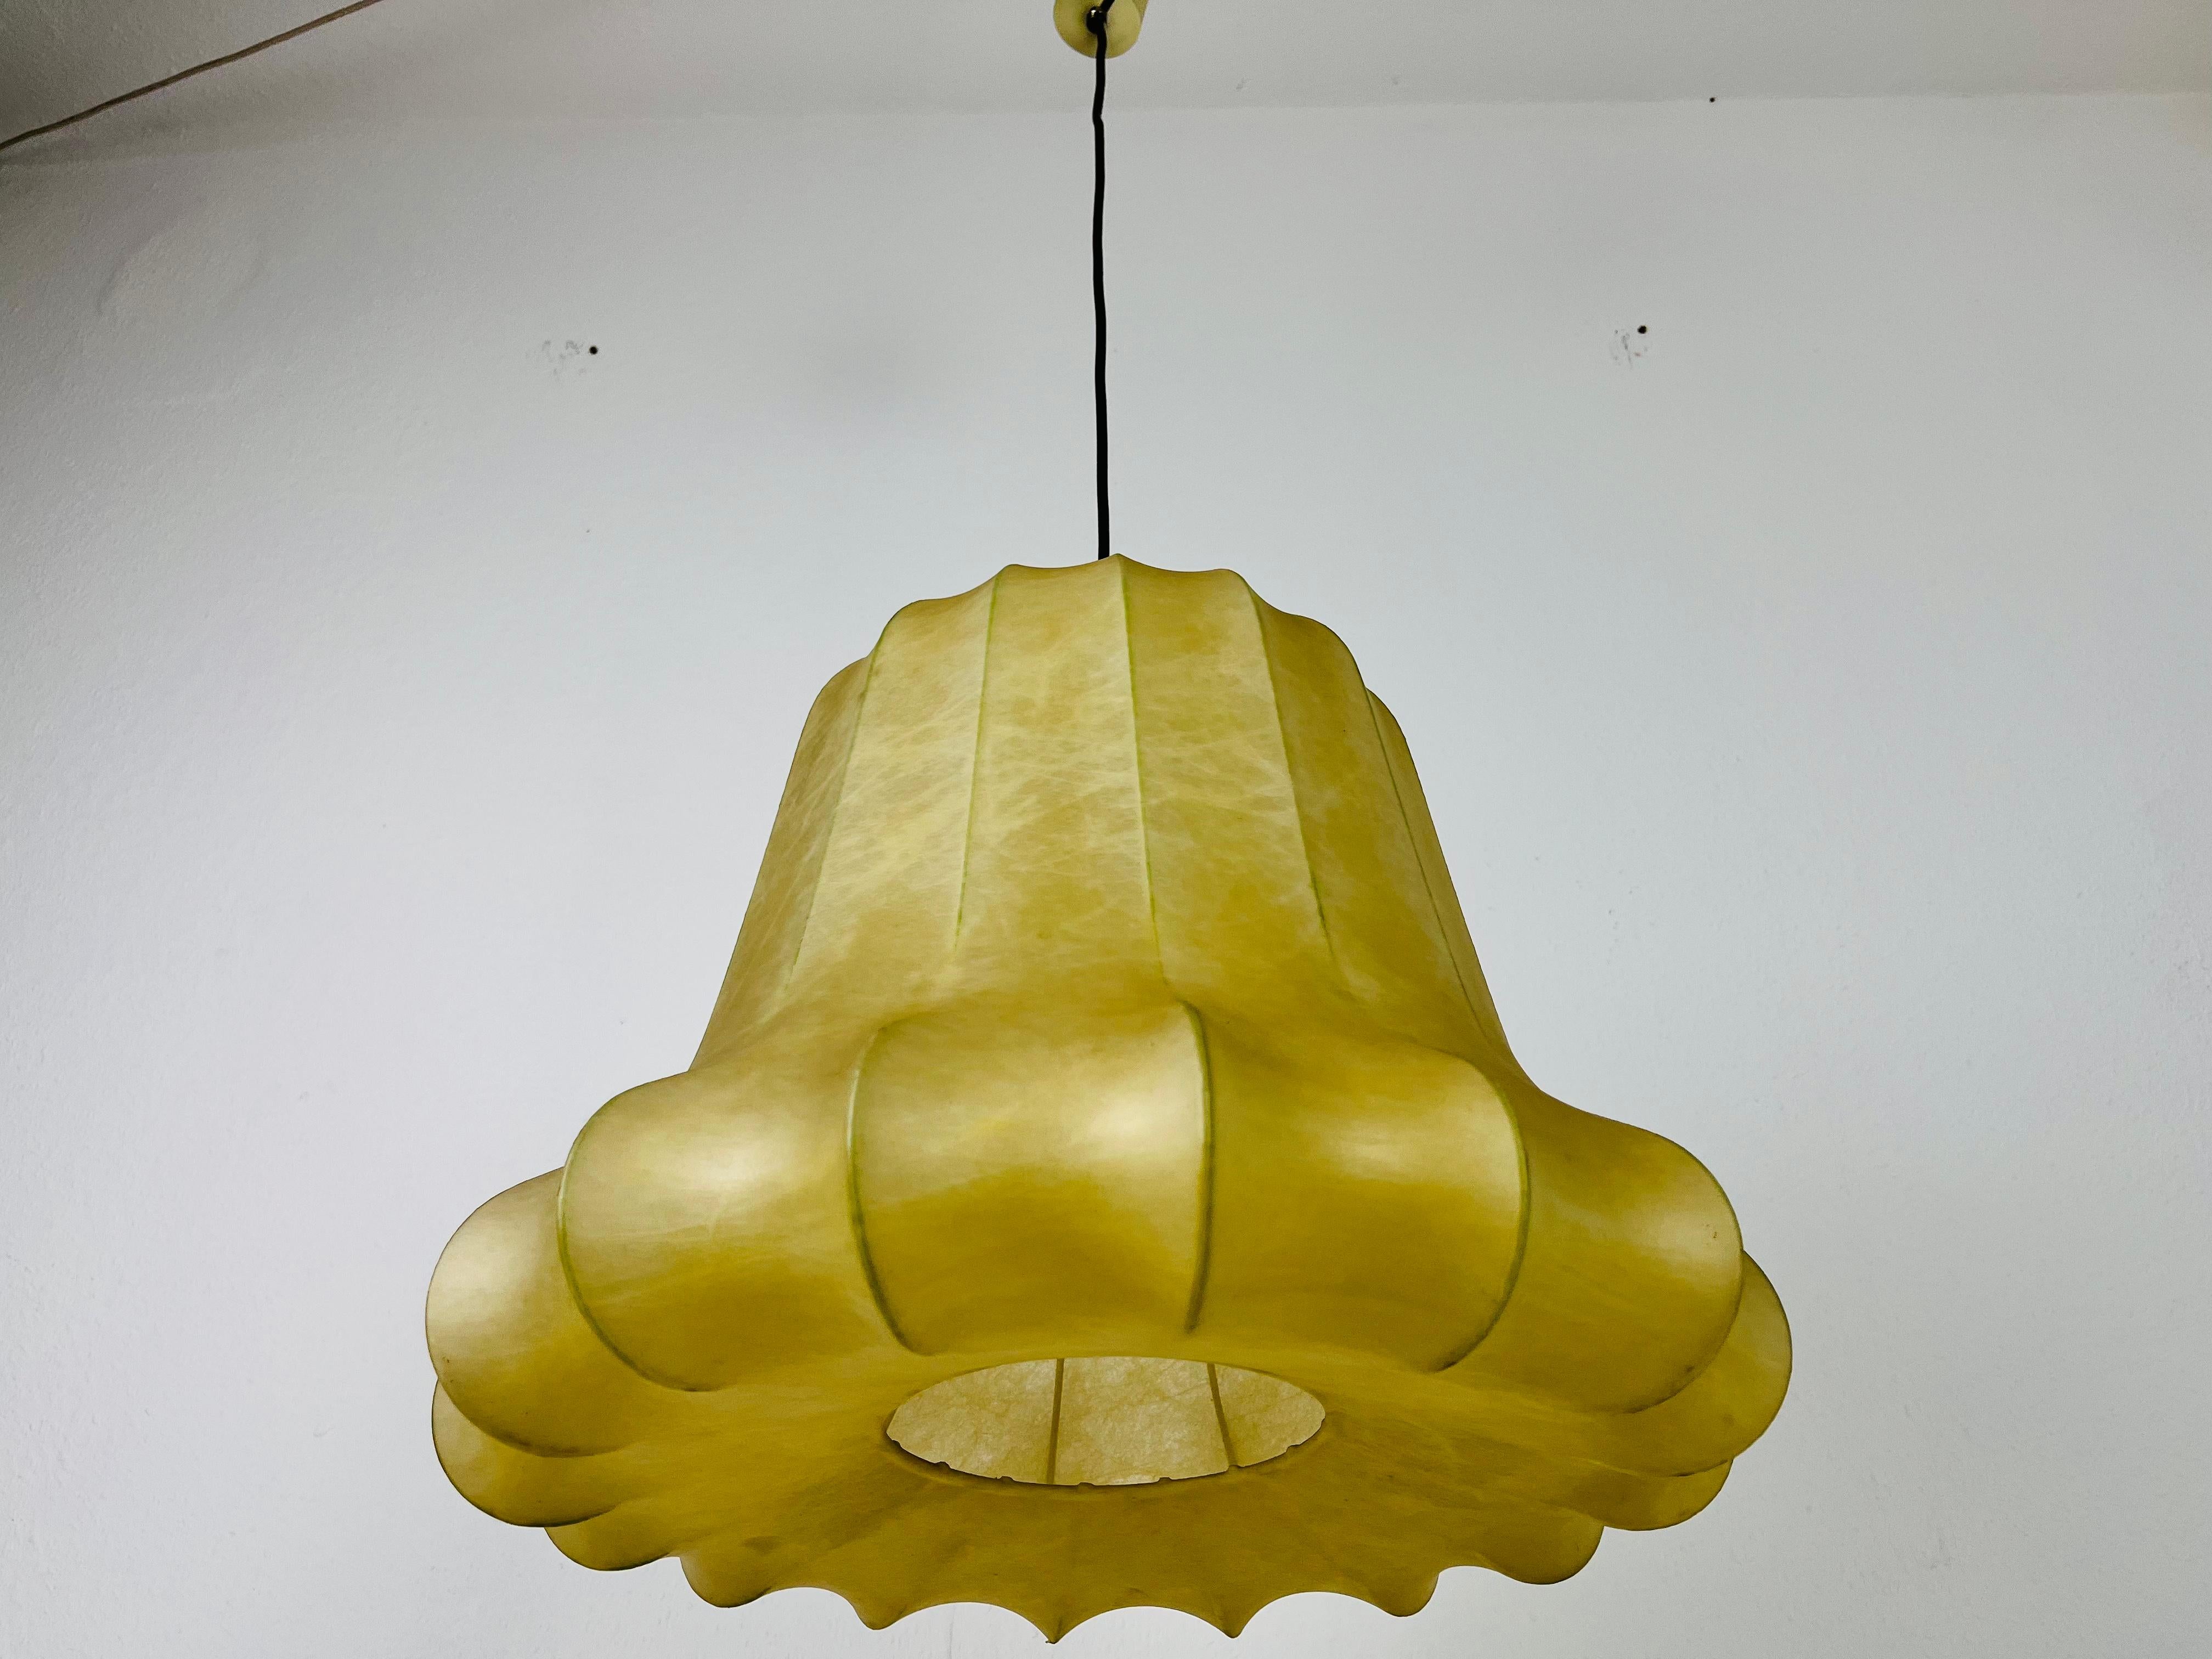 A cocoon pendant lamp made in Italy in the 1960s. The hanging lamp has been manufactured in the design of the lamps made by Achille Castiglioni. The lamp shade is of original cocoon and has an organic shape. 

Measures: 
Height: 35-95 cm
Diameter: